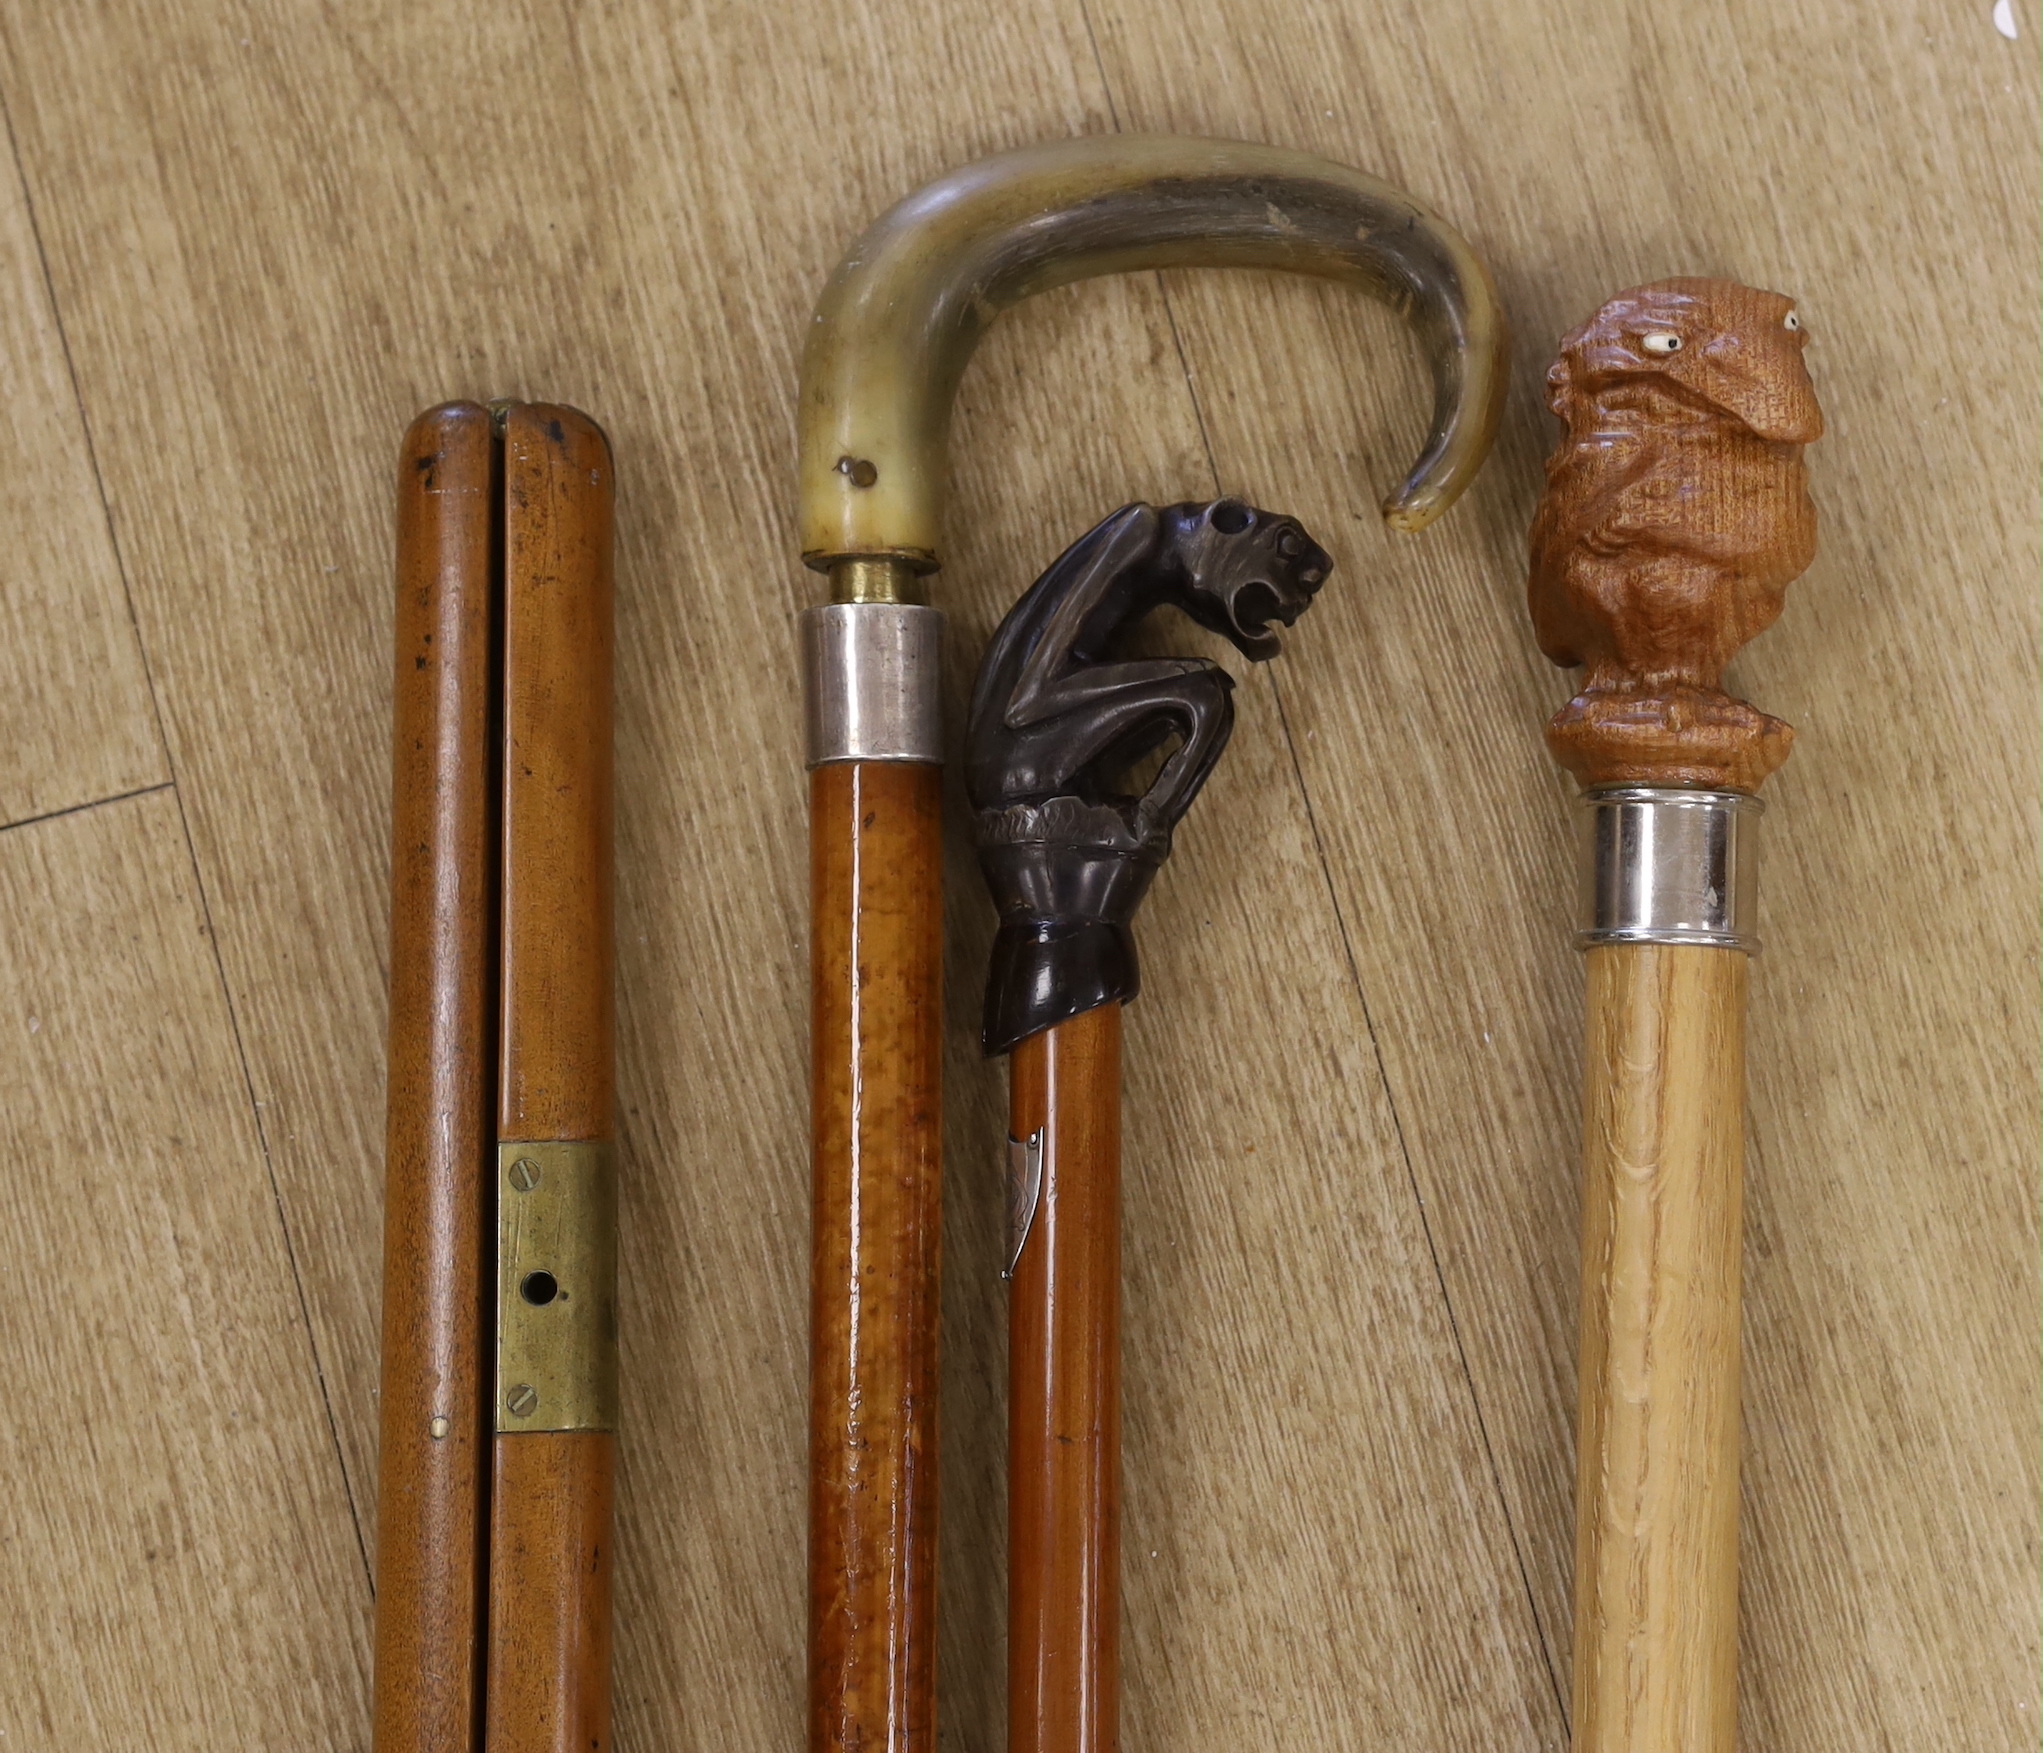 Four canes / walking sticks including a horse measuring stick and a military pace stick